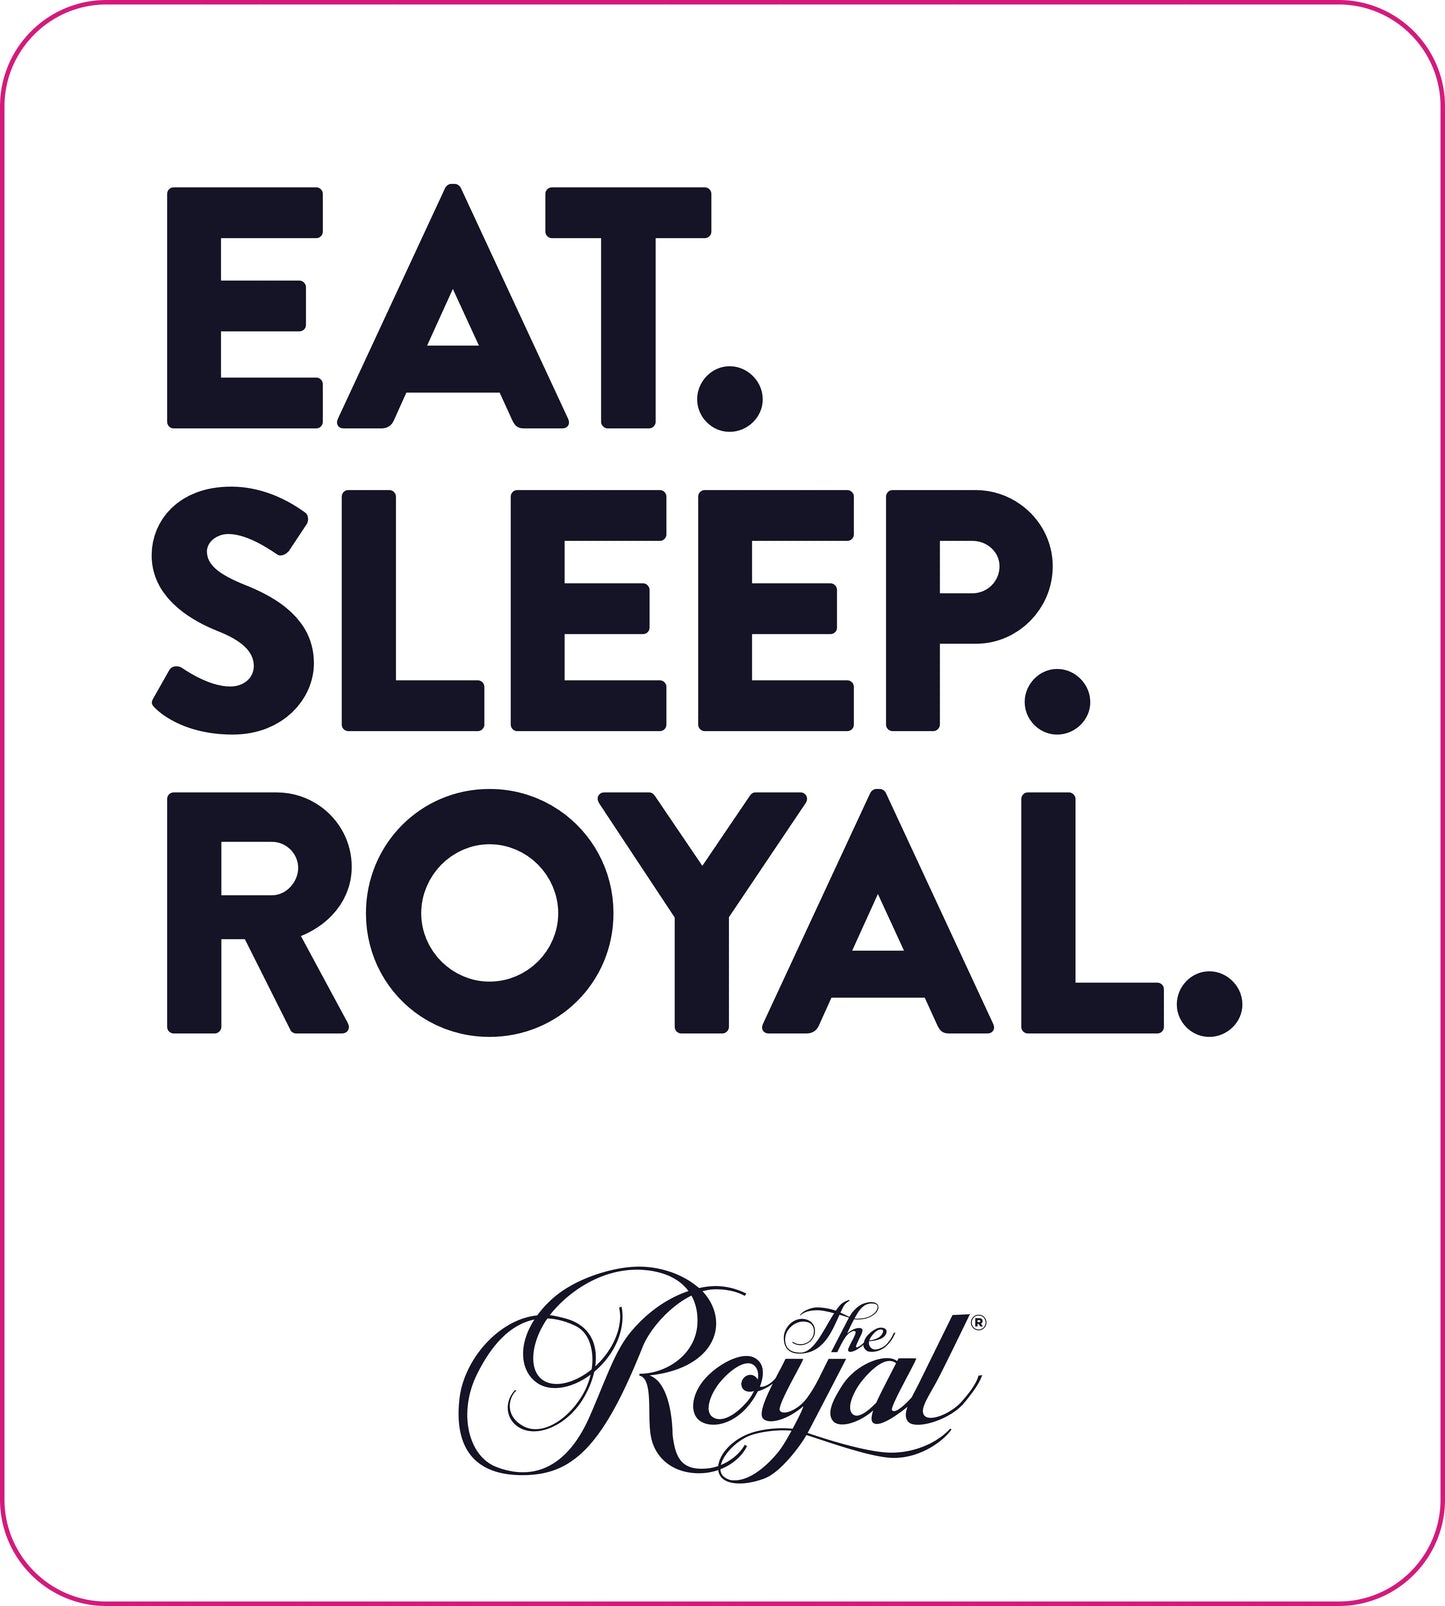 Royal Decals